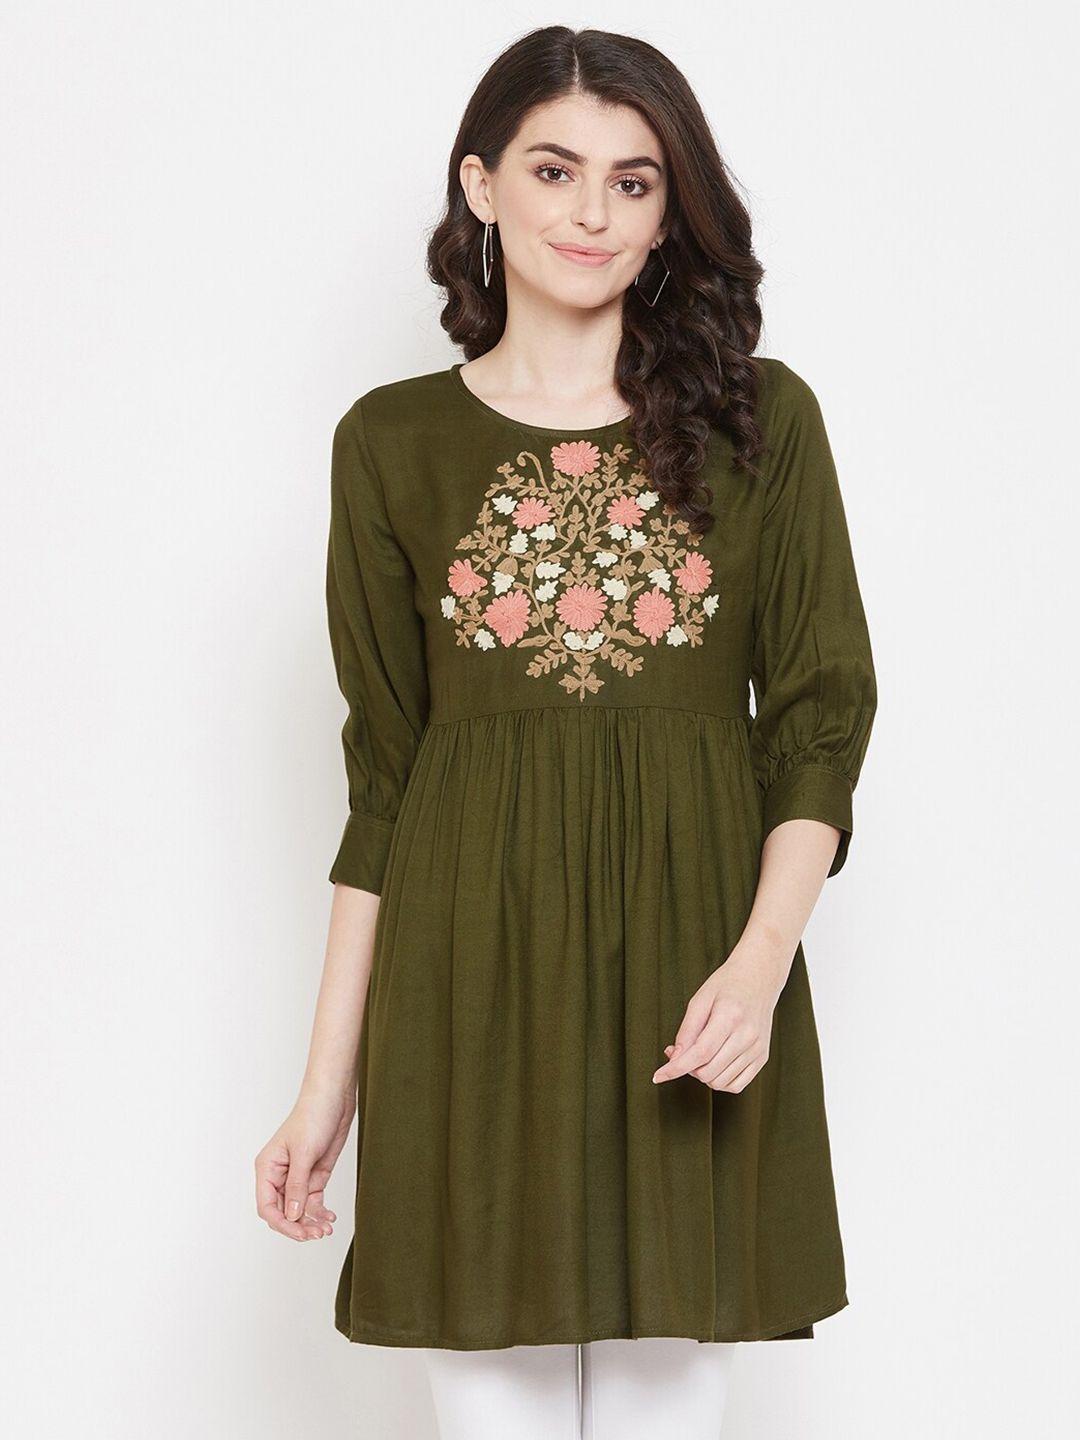 ruhaans-women-green-&-beige-viscose-rayon-floral-embroidered-tunic